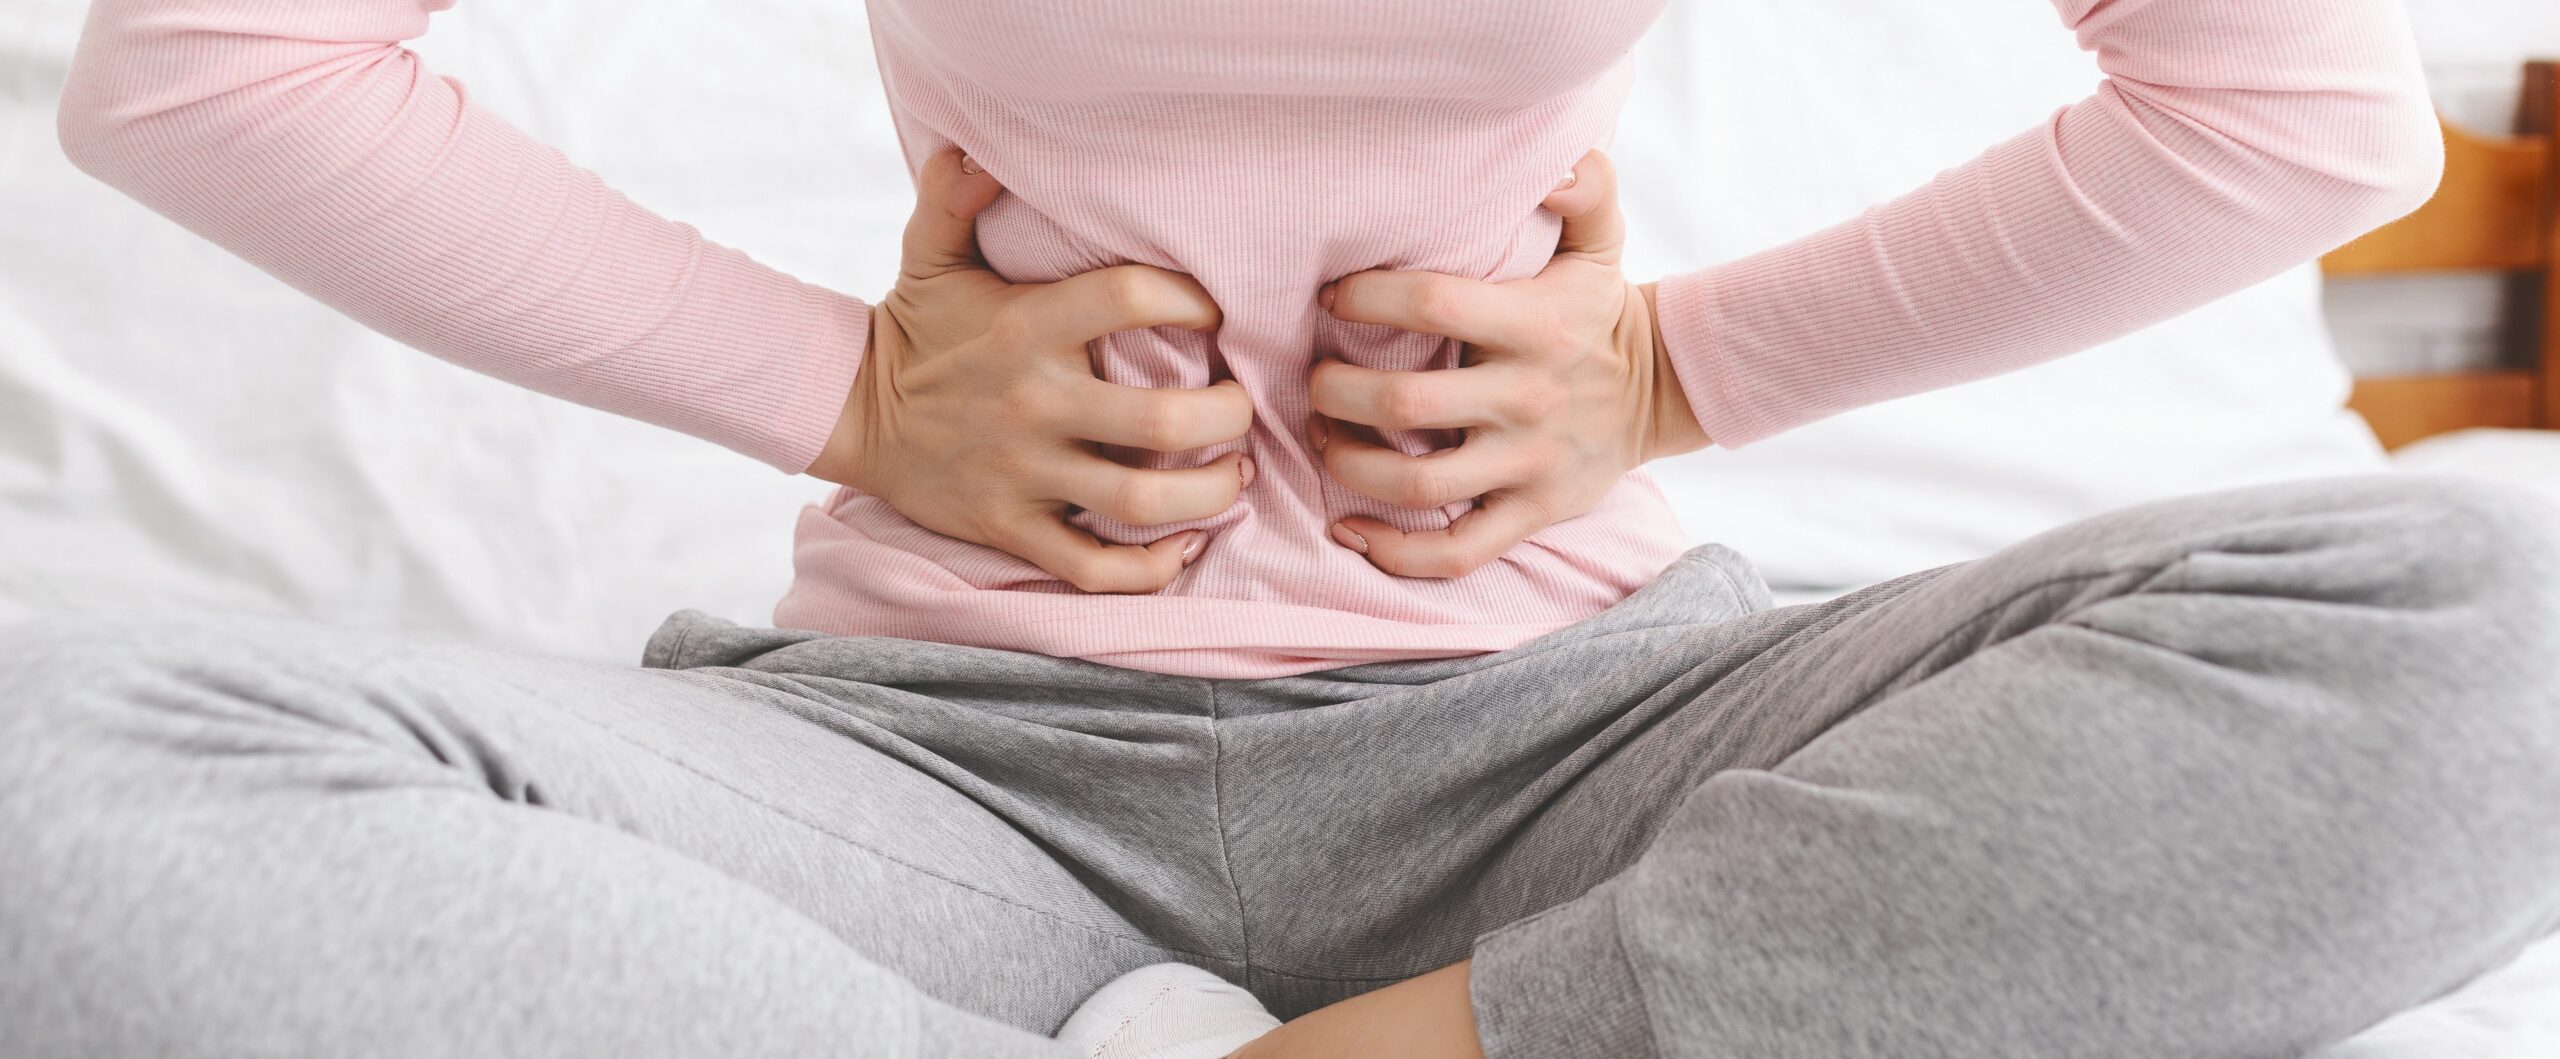 Person suffering from cramps or stomach pain. They are holding their abdomen in pain while sitting cross legged